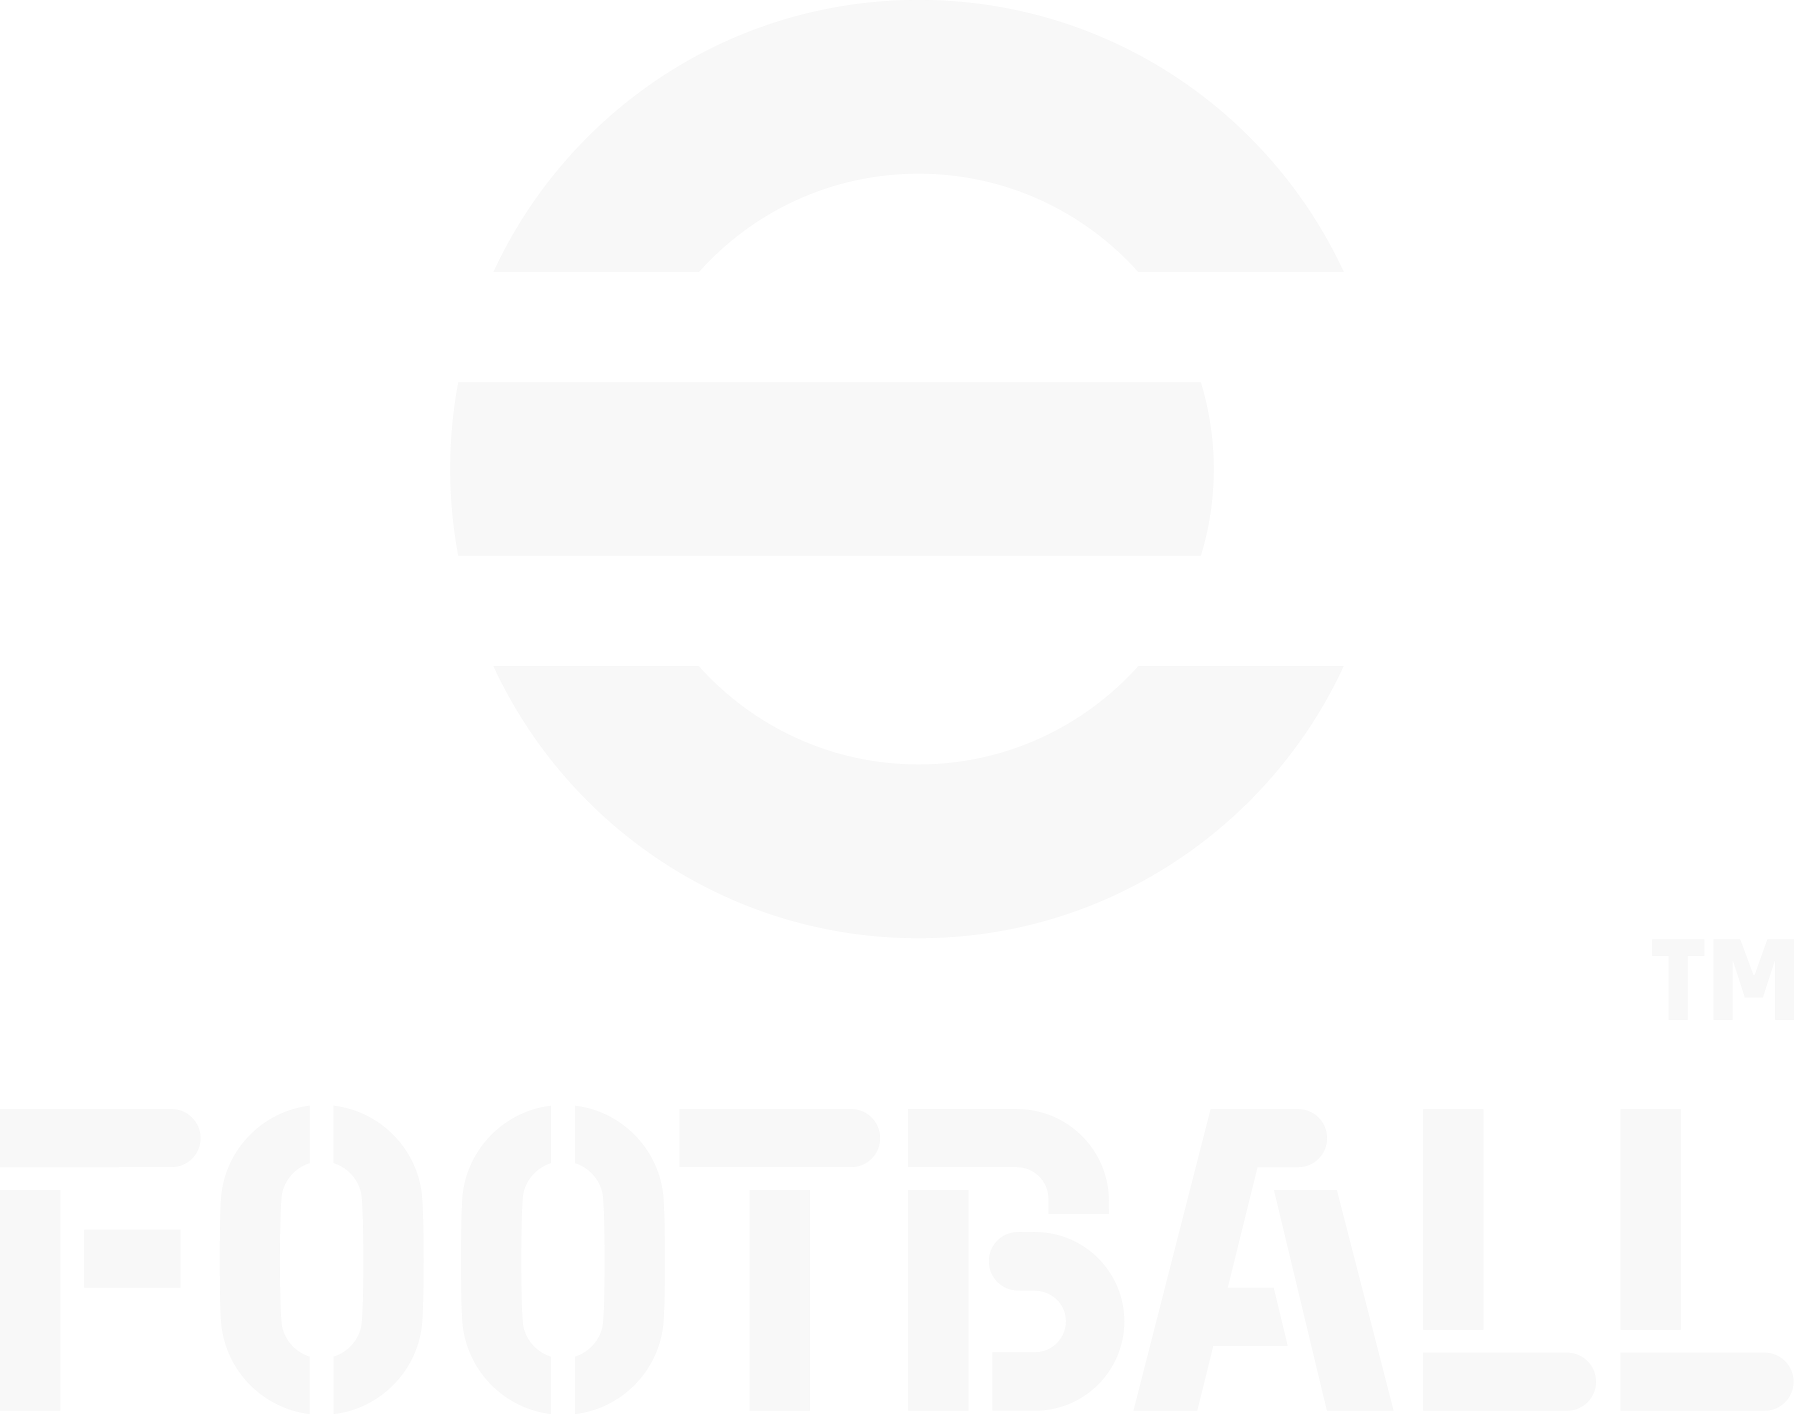 Icon for eFootball 2024 by carl6005